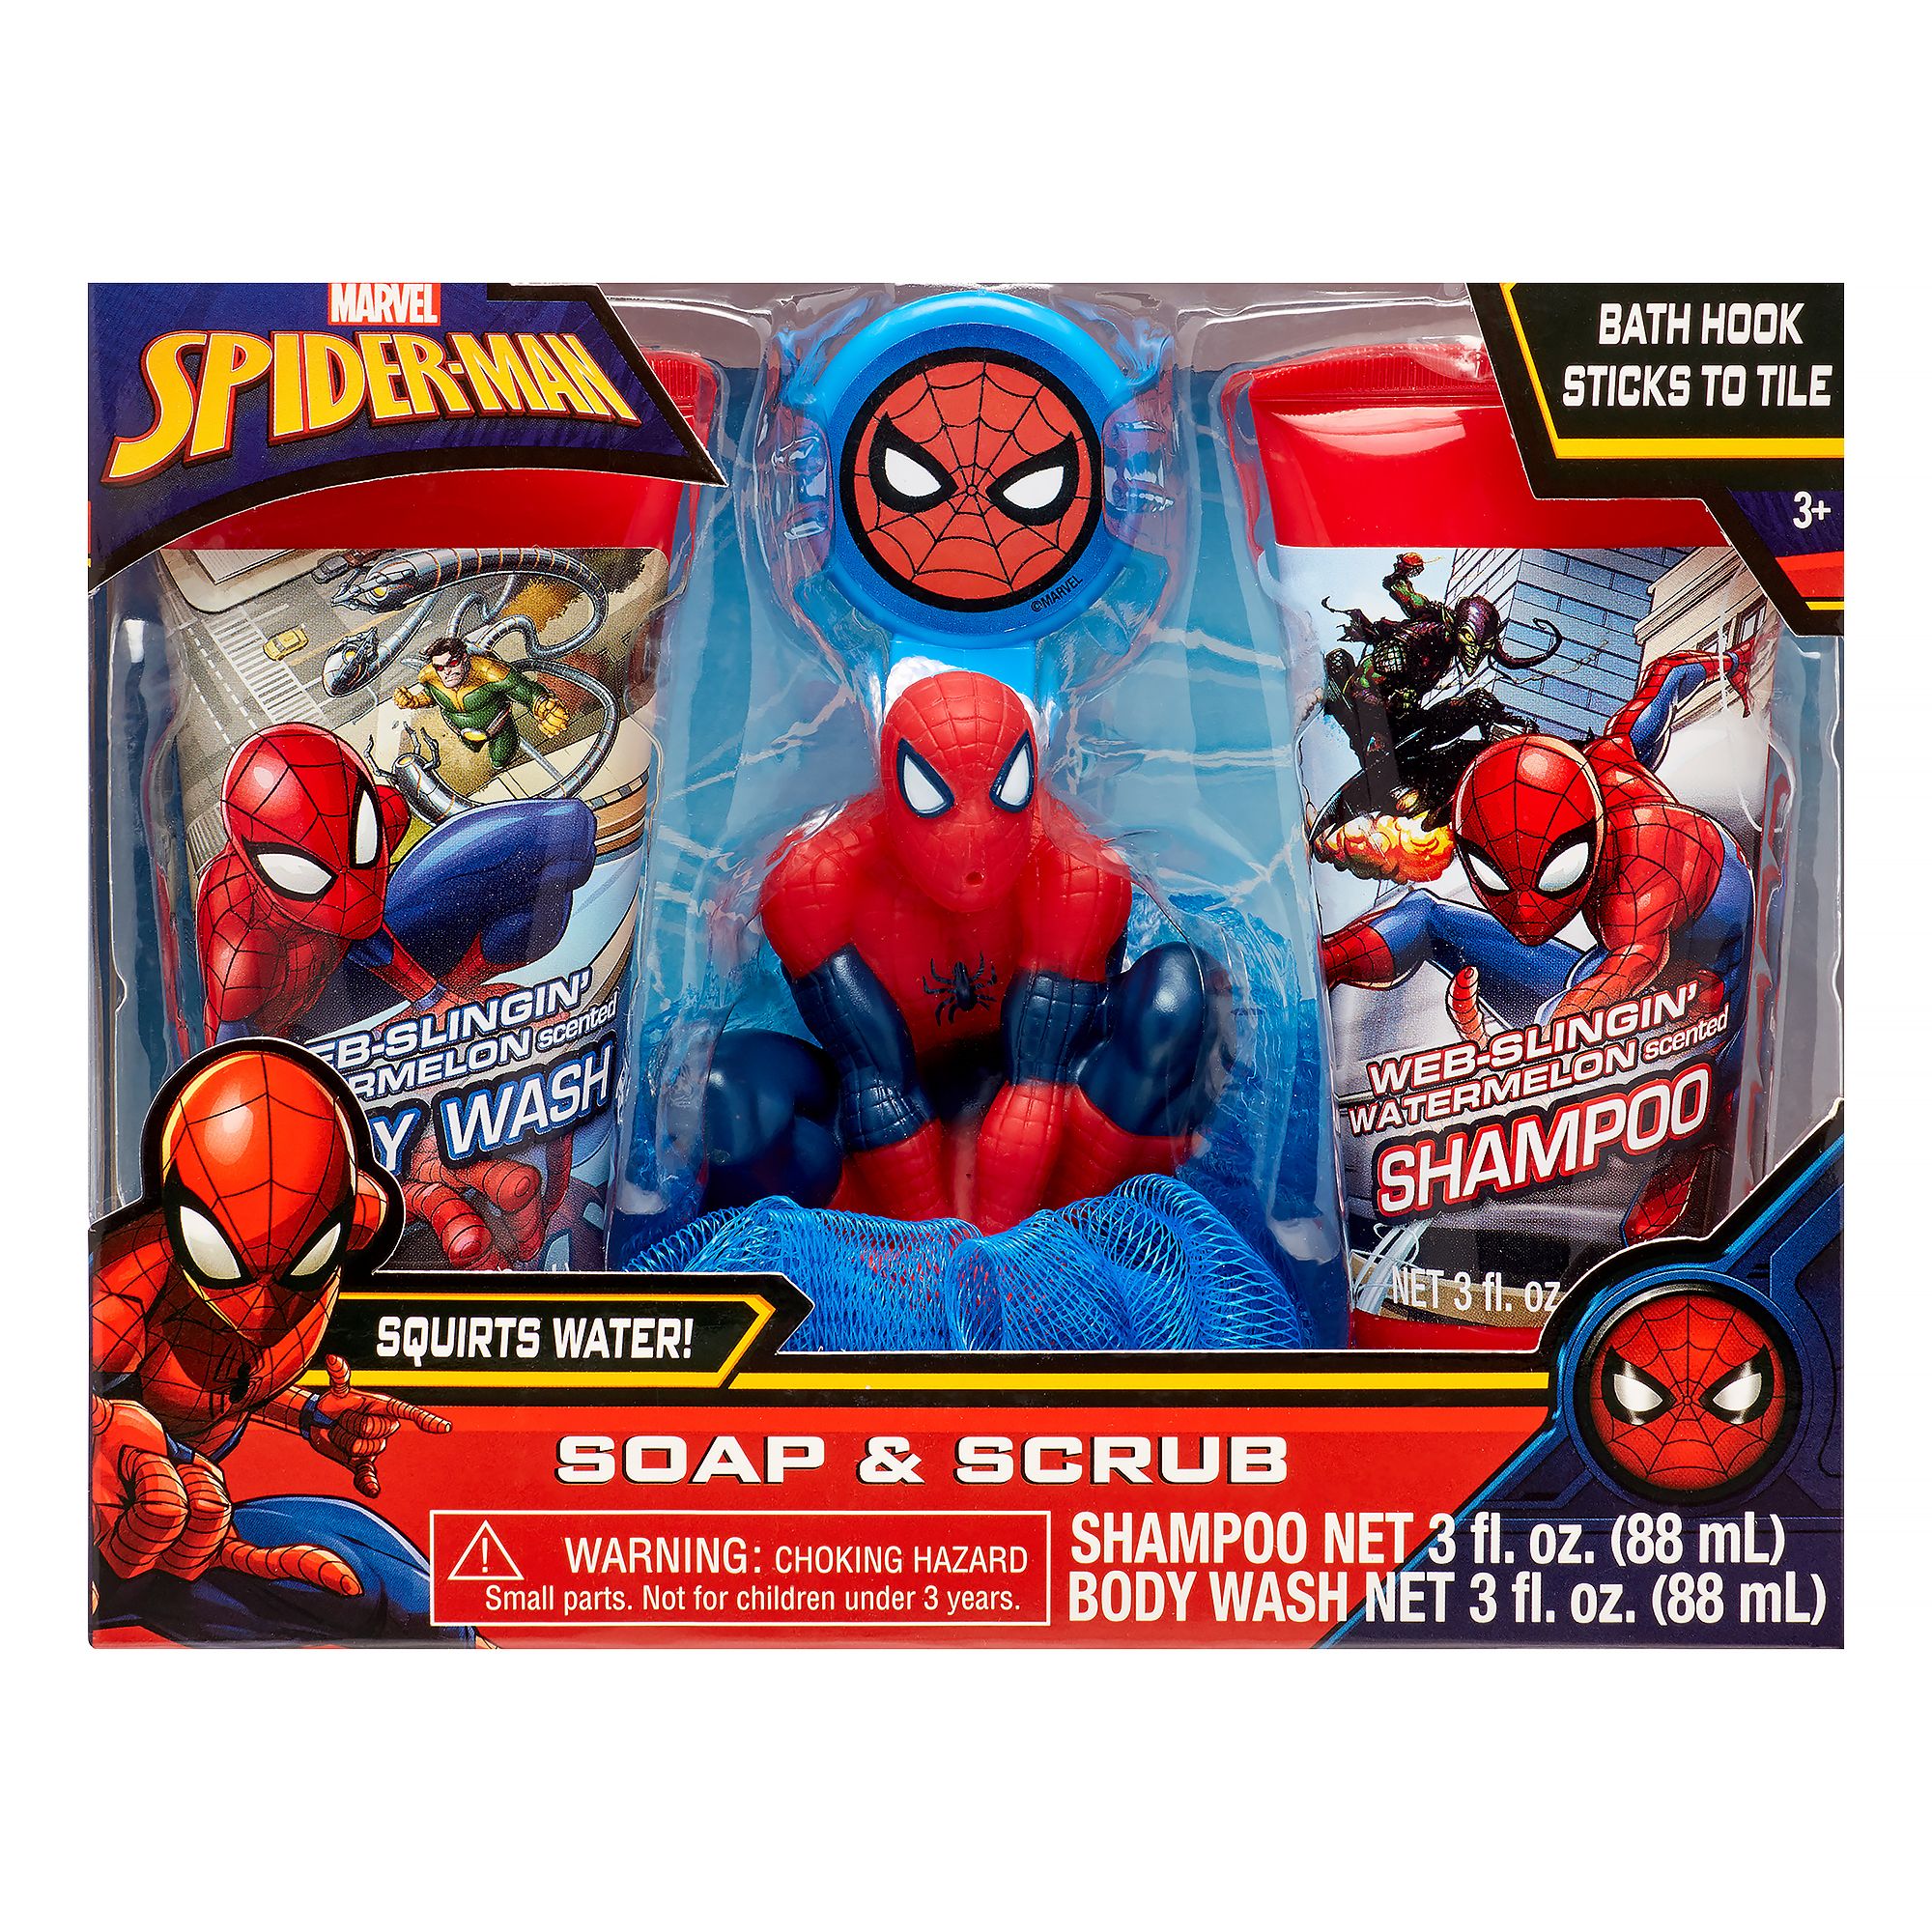 Marvel Spider-Man 4-Piece Soap and Scrub Body Wash and Shampoo Set - image 1 of 5